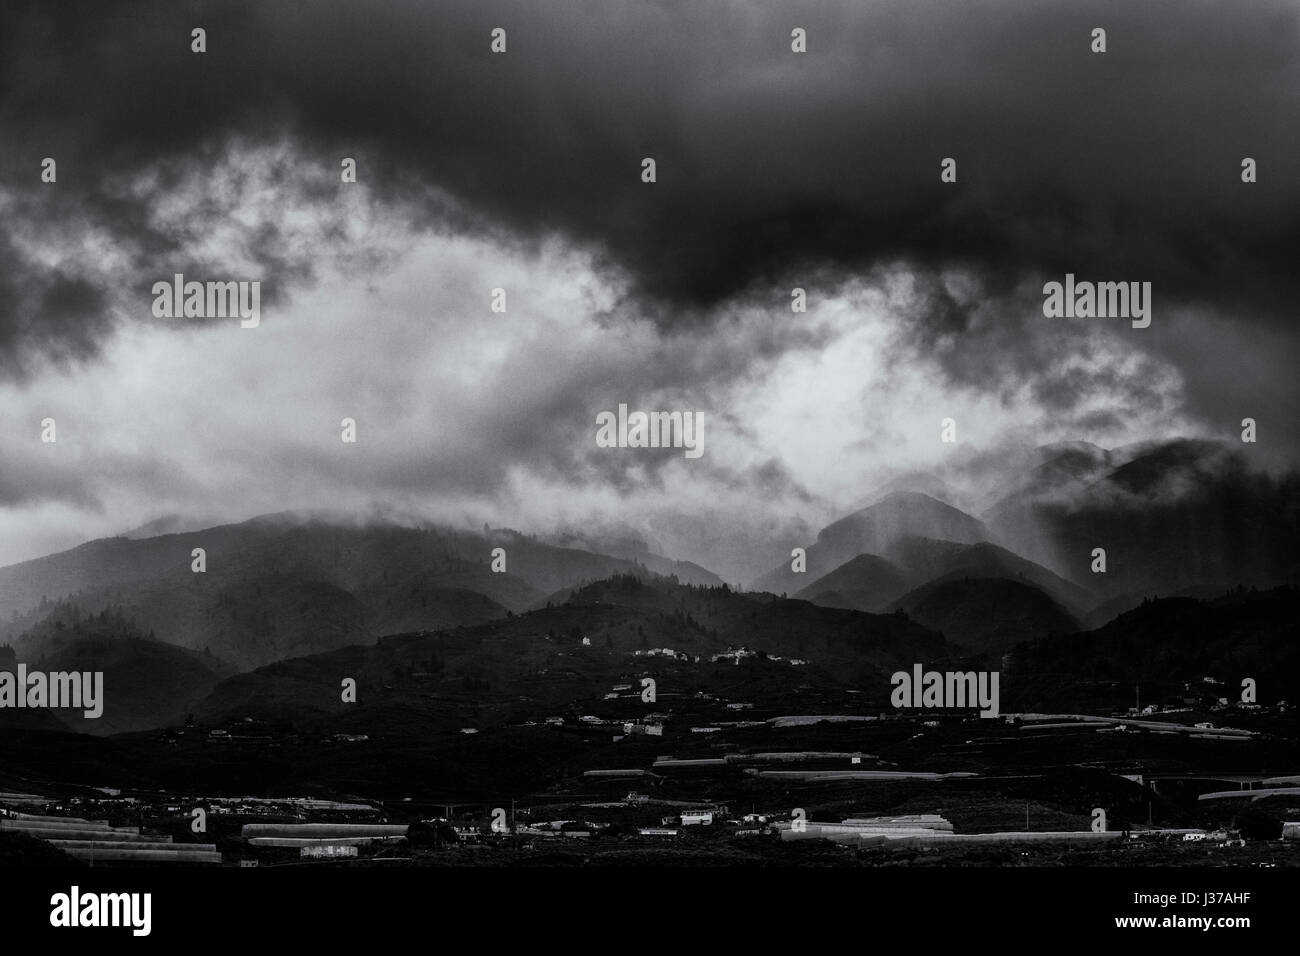 Storm clouds at dawn over the foothills and mountains in Guia de Isora area on the west of Tenerife, Canary Islands, Spain Stock Photo